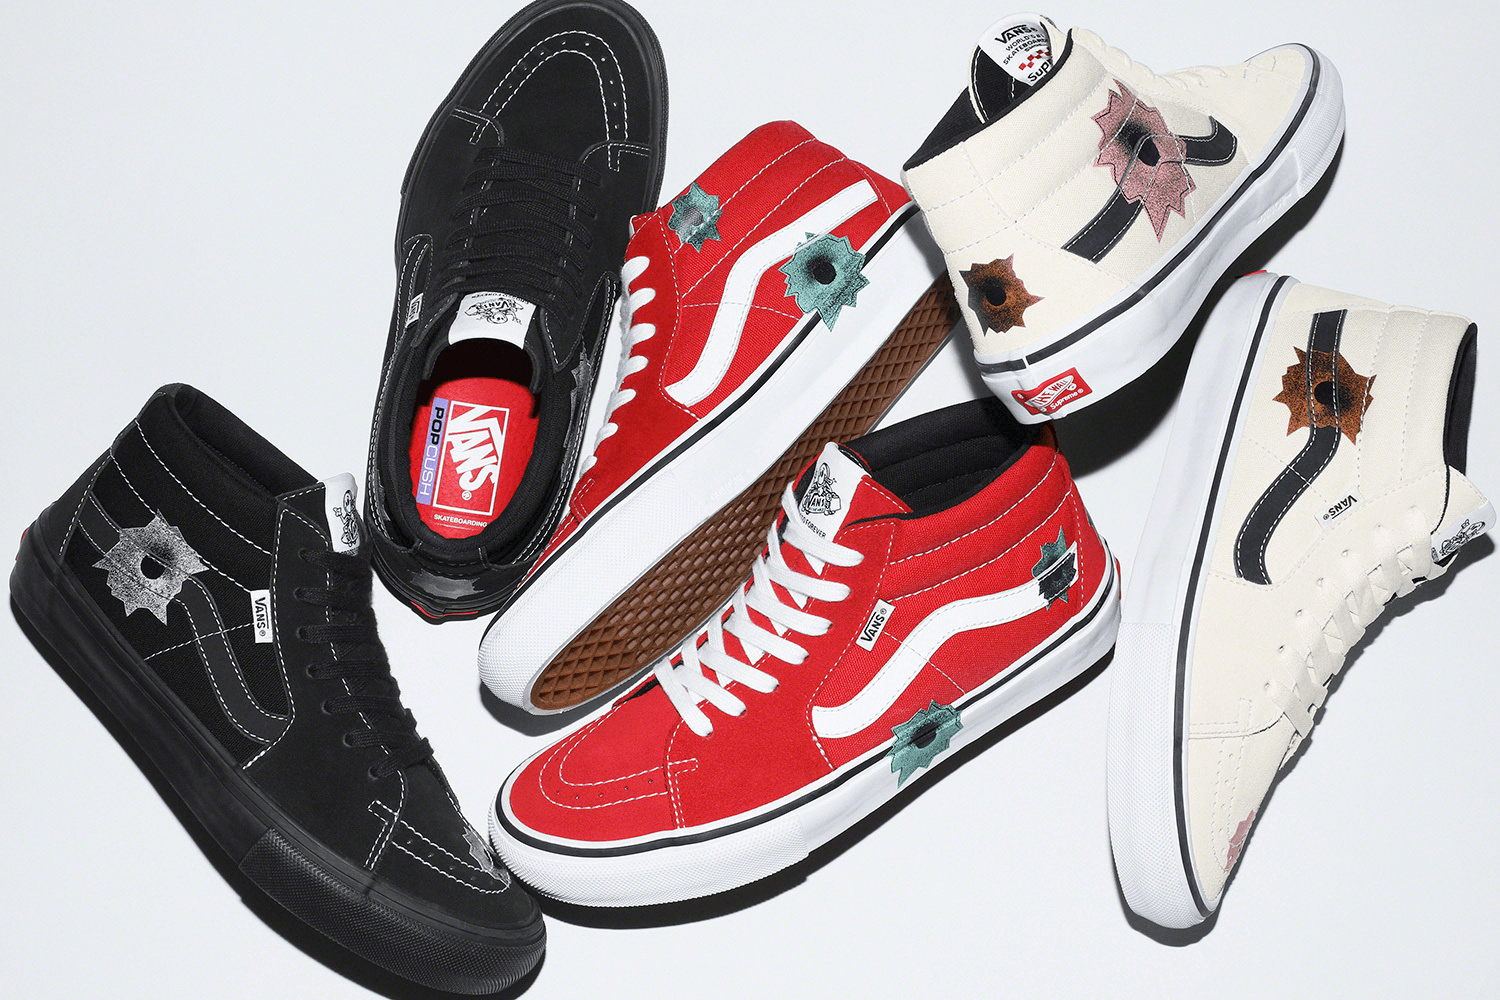 Supreme and Vans collaborate with Nate Lowman